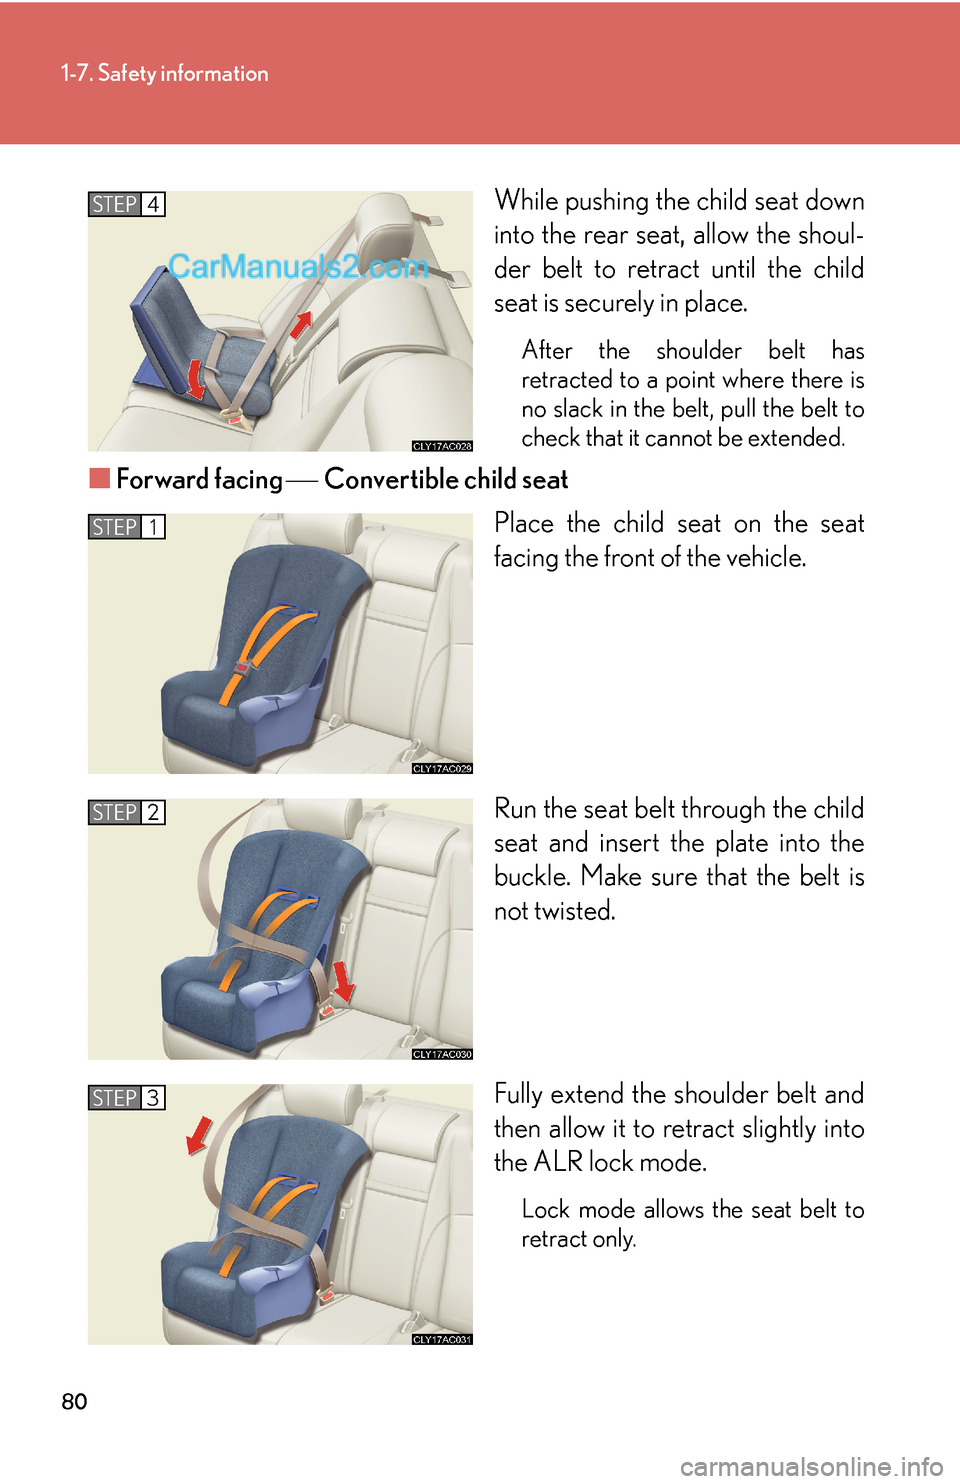 Lexus ES350 2007  Safety information 80
1-7. Safety information
While pushing the child seat down
into the rear seat, allow the shoul-
der belt to retract until the child
seat is securely in place.
After the shoulder belt has
retracted t